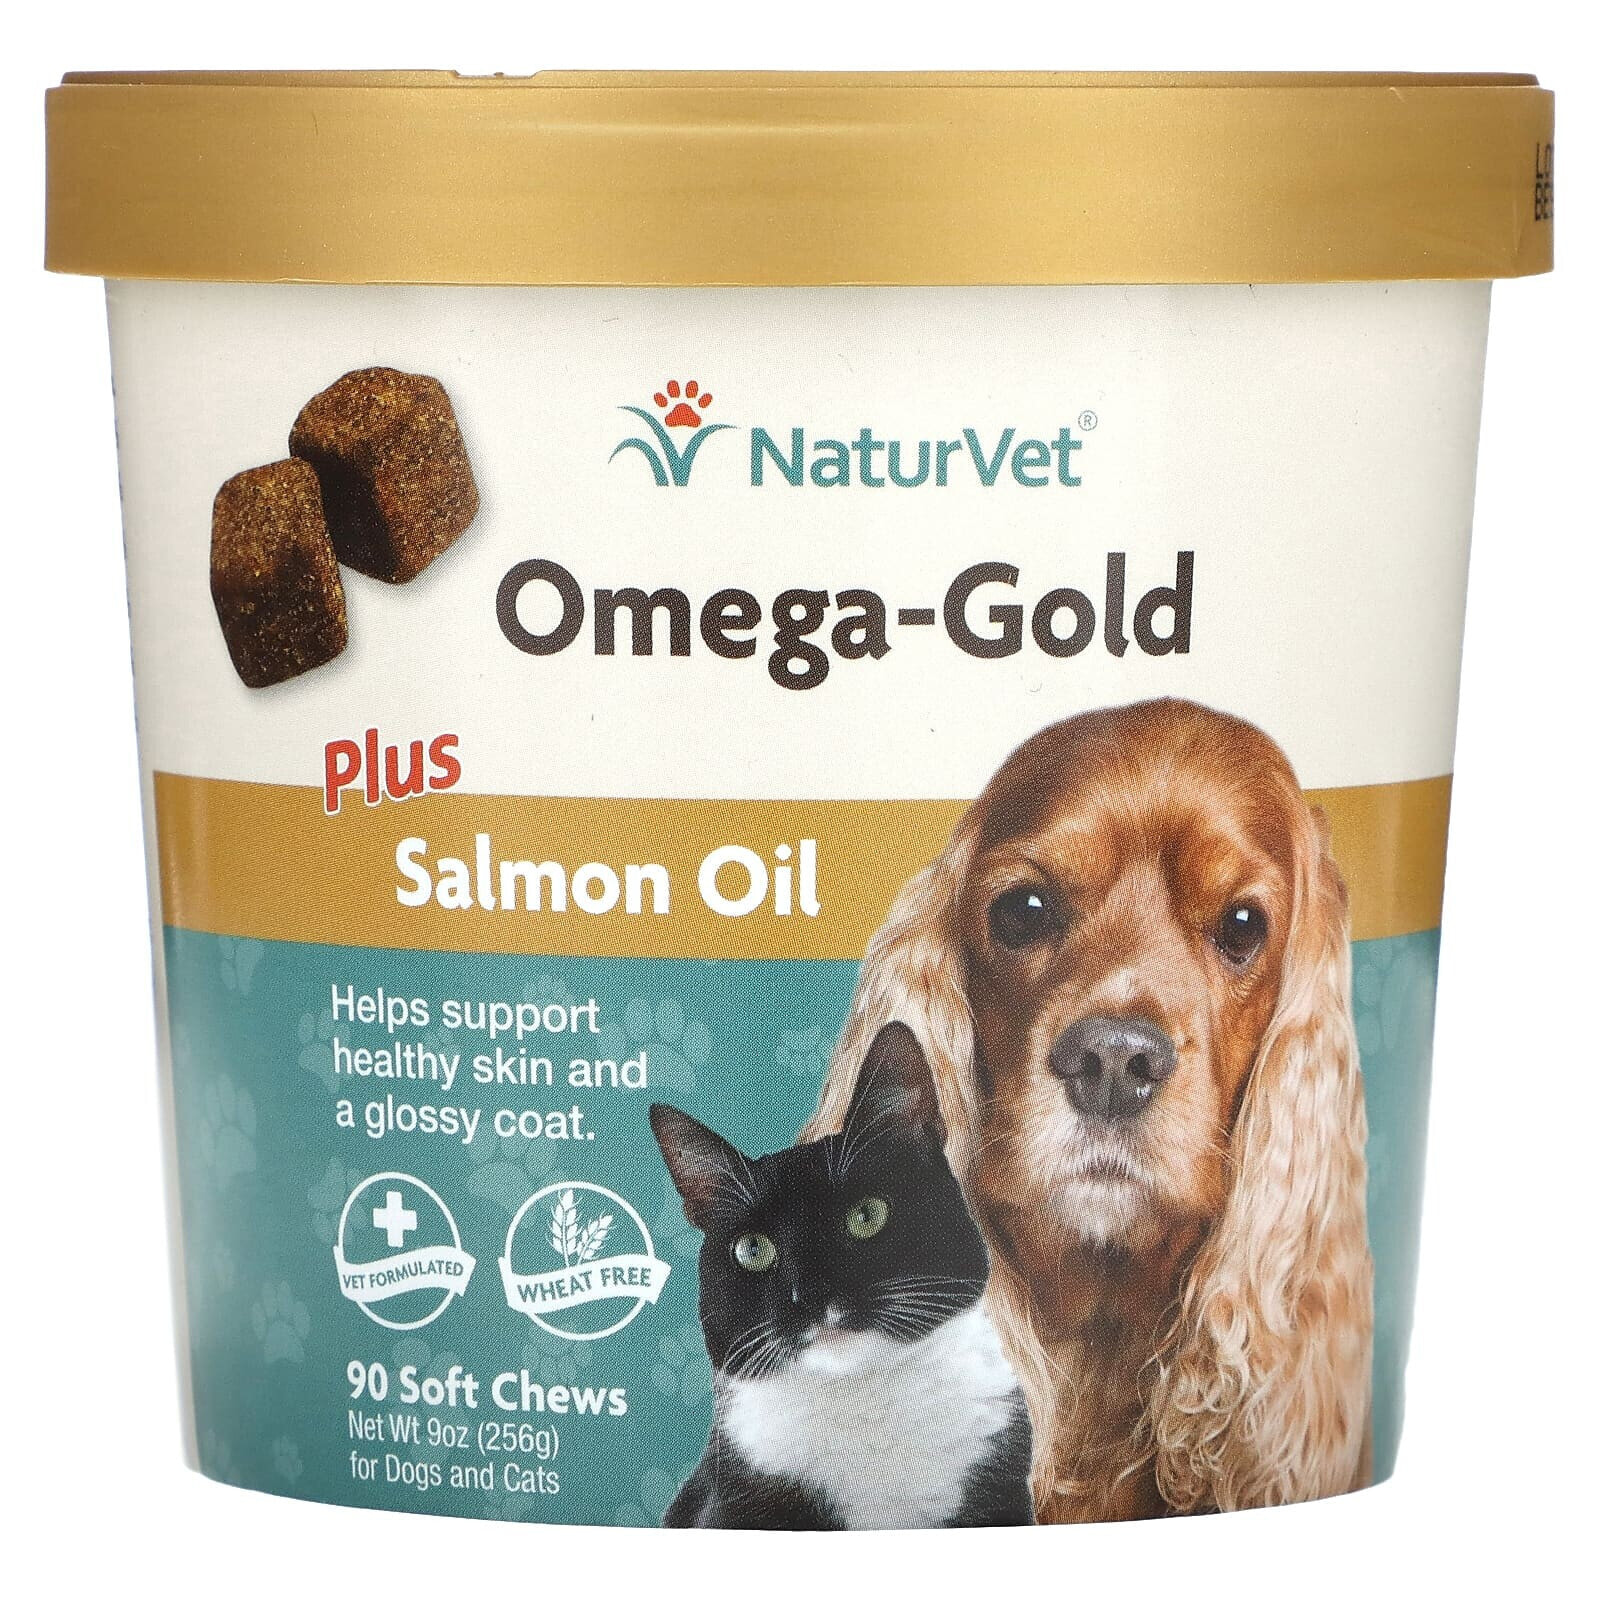 Omega-Gold Plus Salmon Oil, For Dogs and Cats, 180 Soft Chews, 18 oz (513 g)